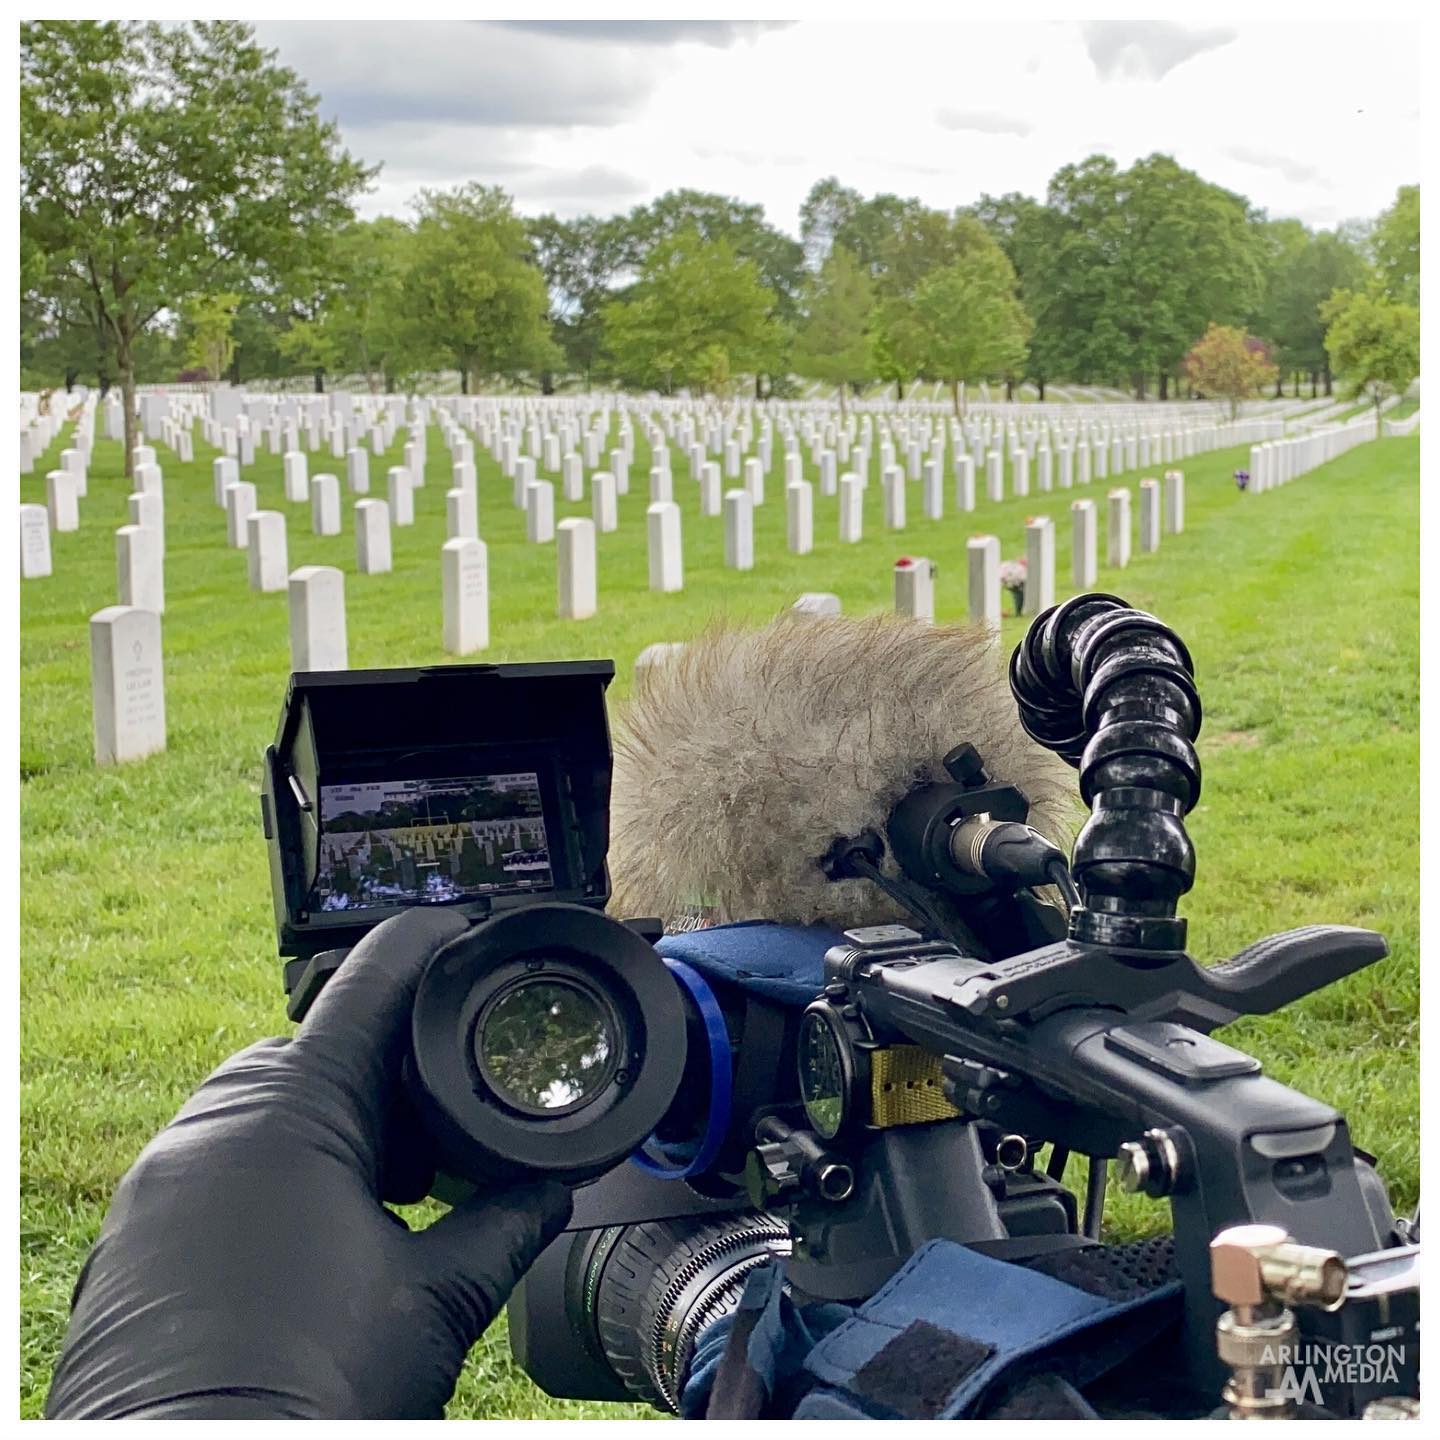 Gloved up and waiting for a family to arrive in section 60

#Arlington⠀
#ArlingtonMedia⠀
#ArlingtonCemetery⠀
#ArlingtonNationalCemetery⠀